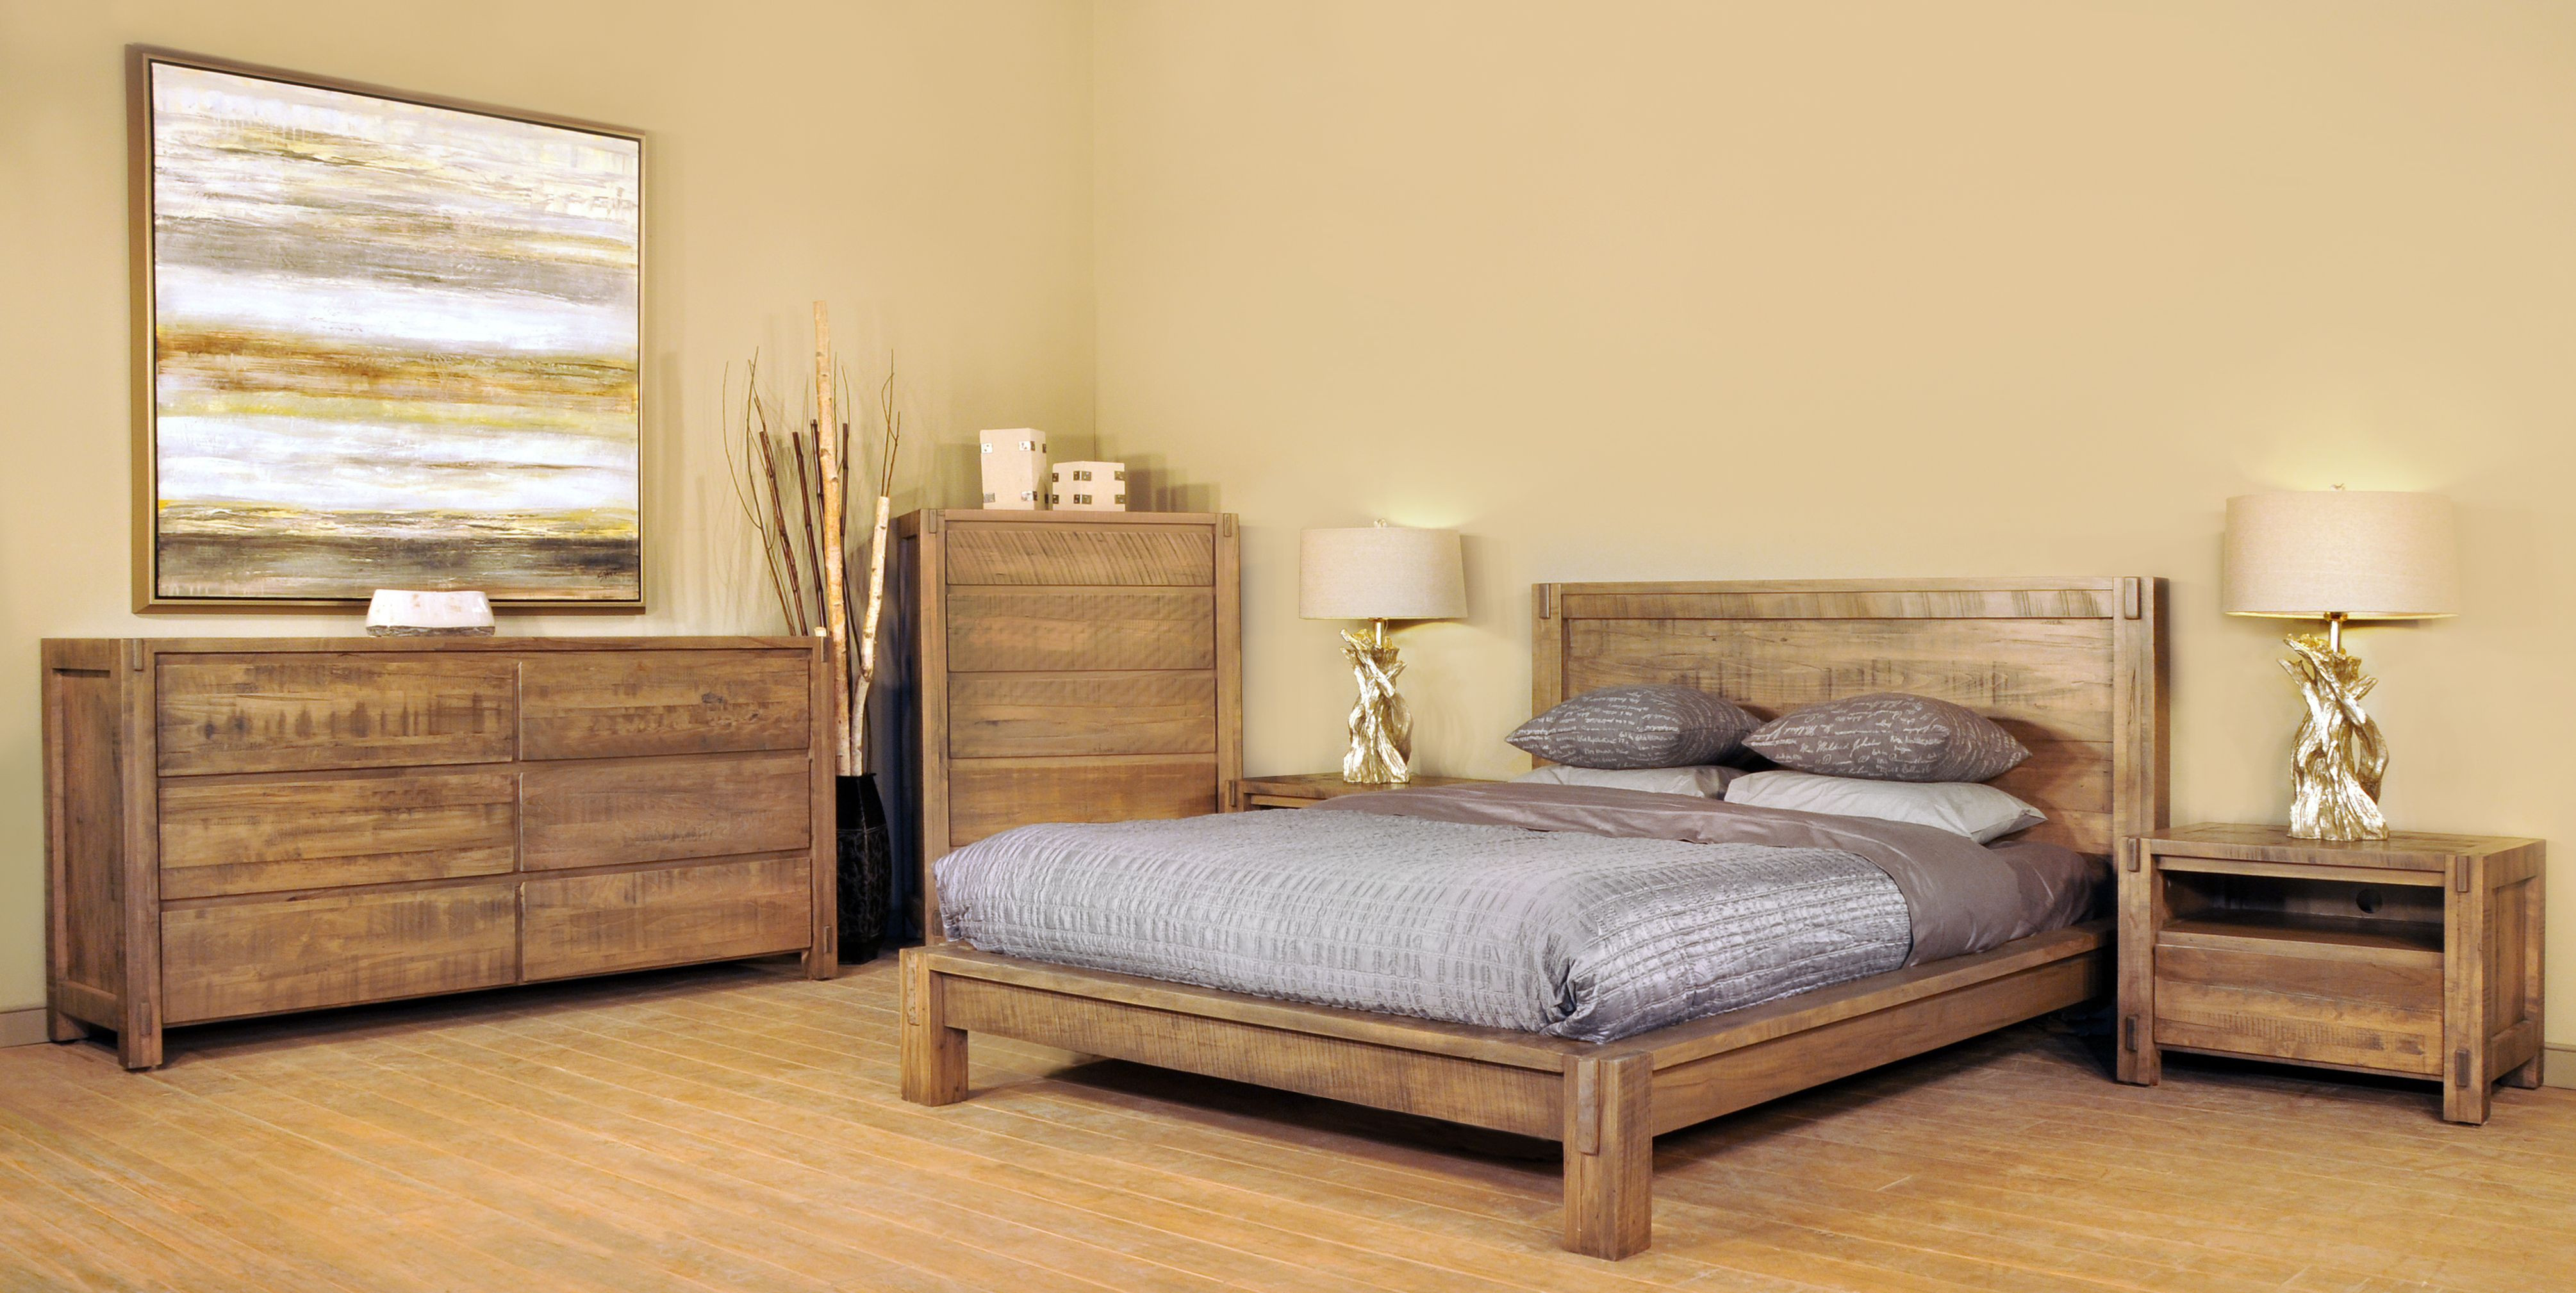 Ruff Sawn Neo Bedroom Collection